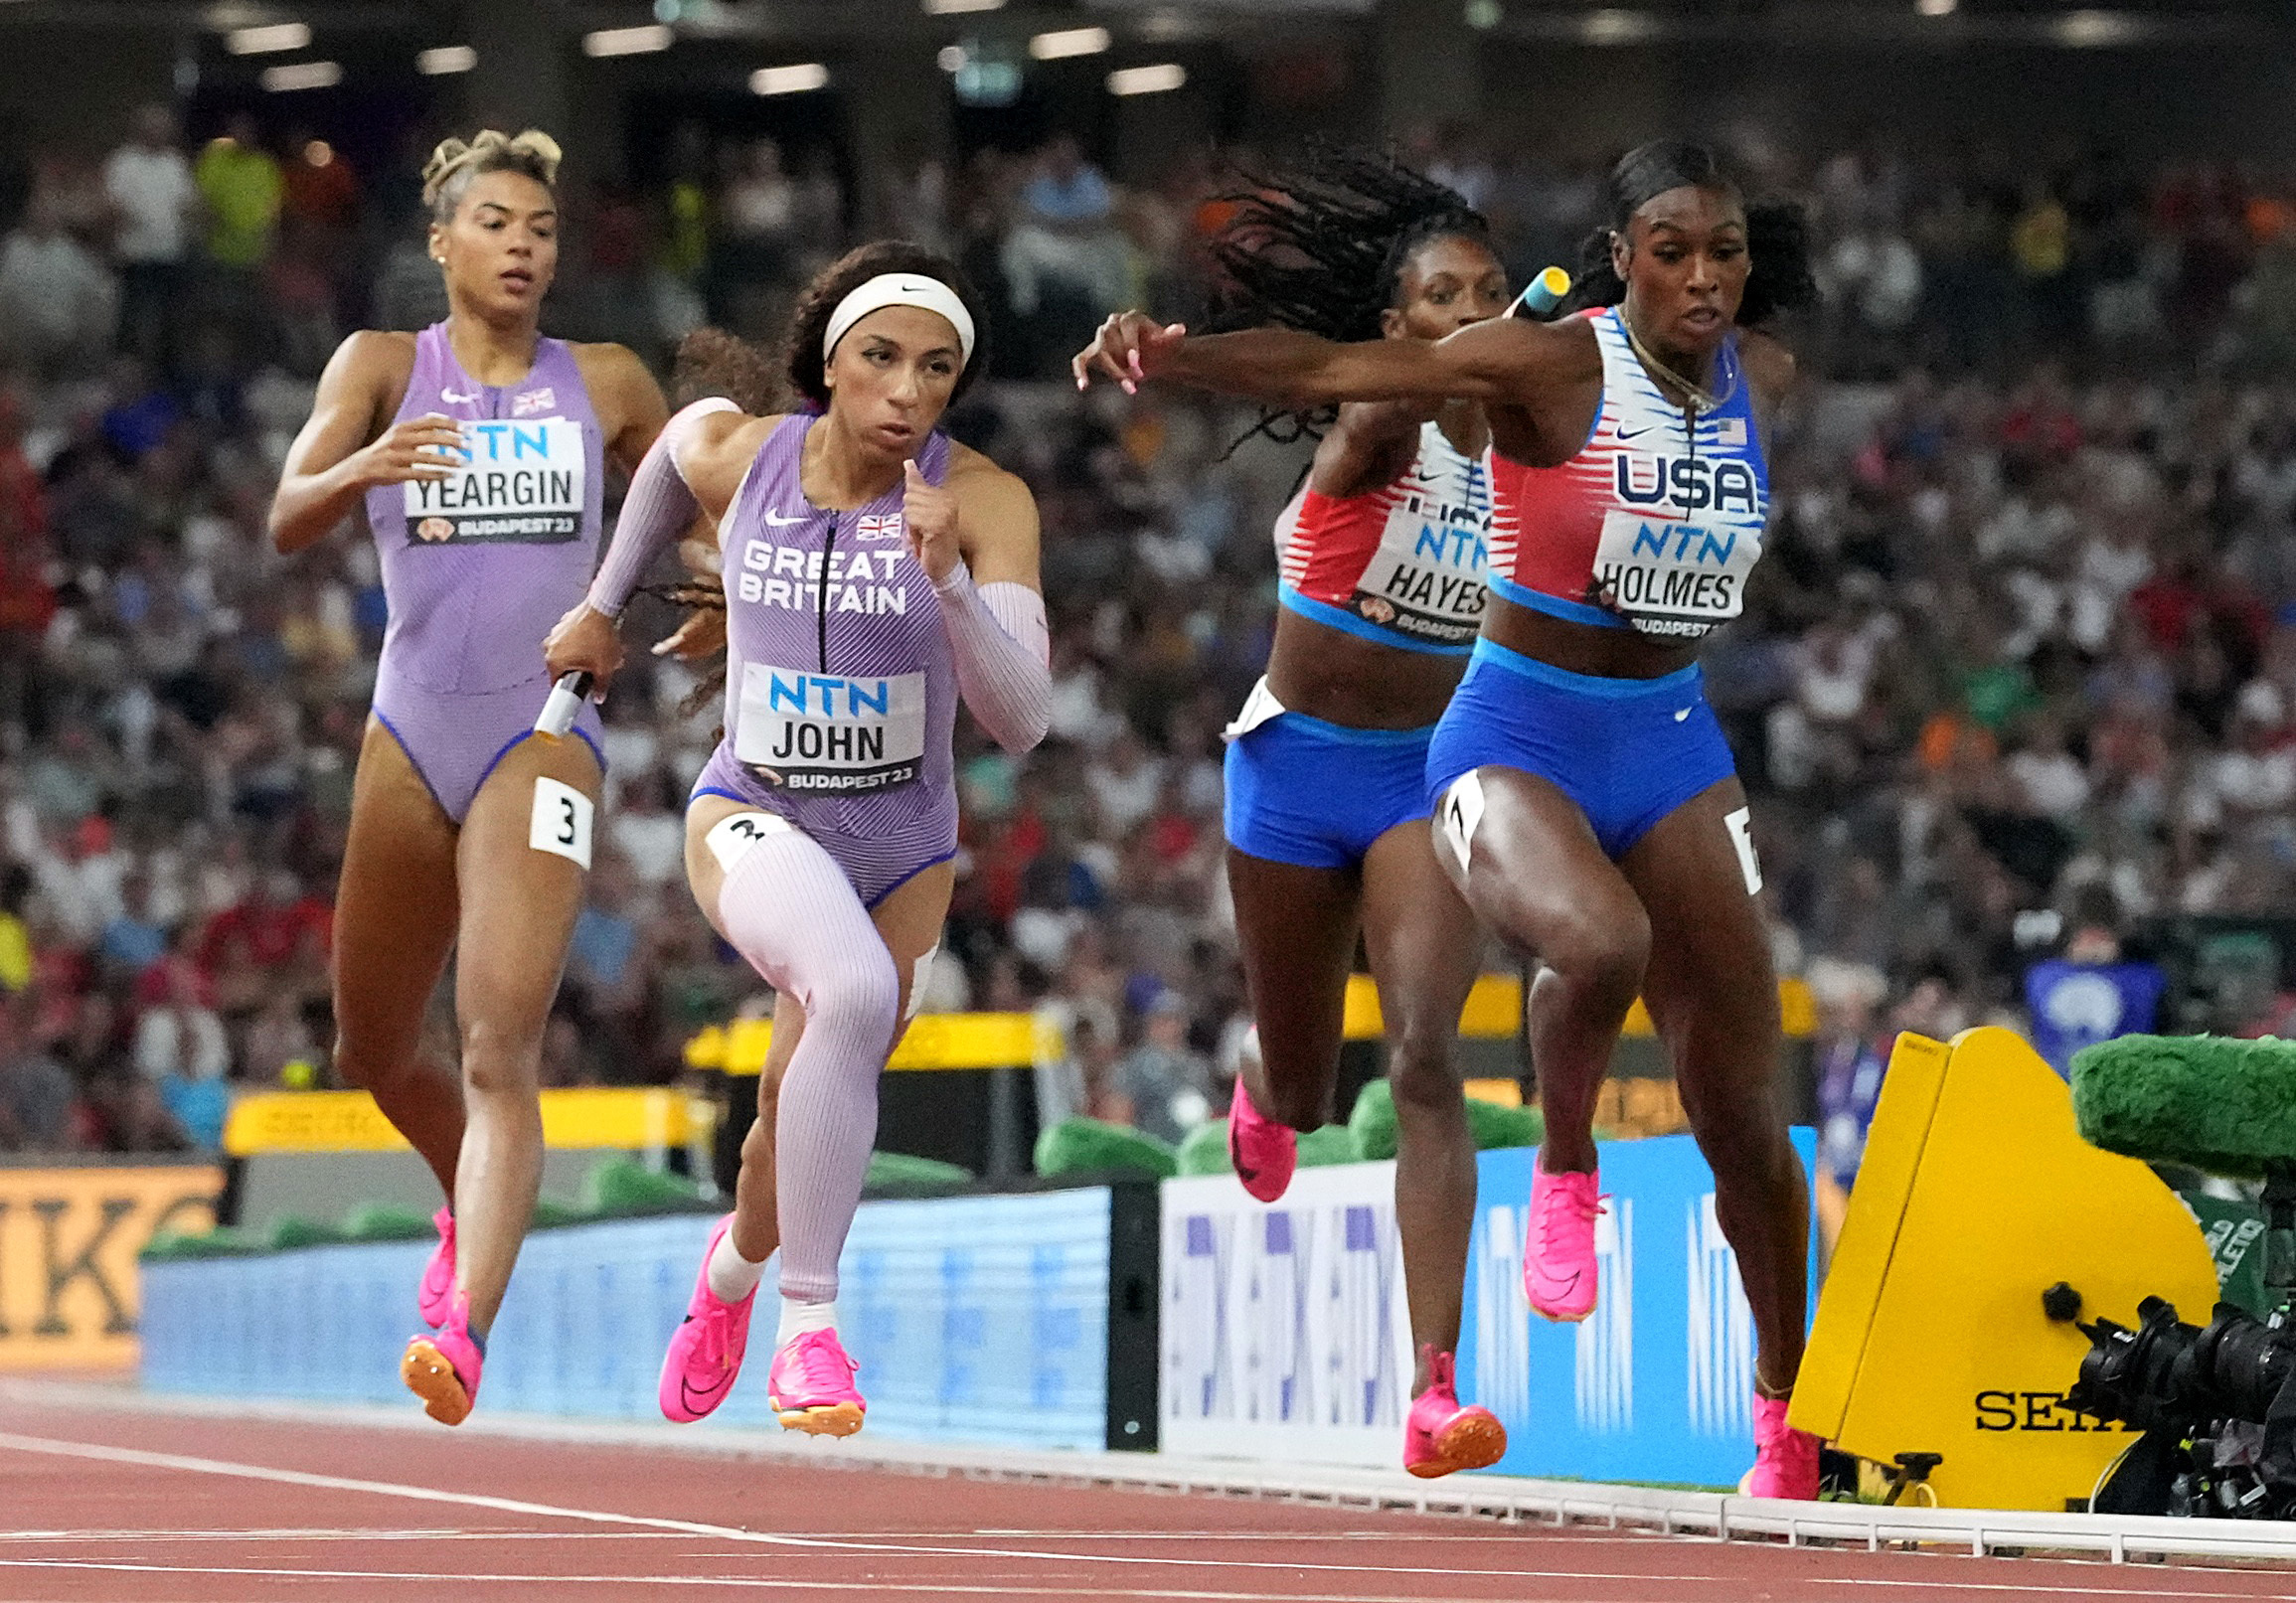 U.S. women disqualified from 4x400m relay after baton fail